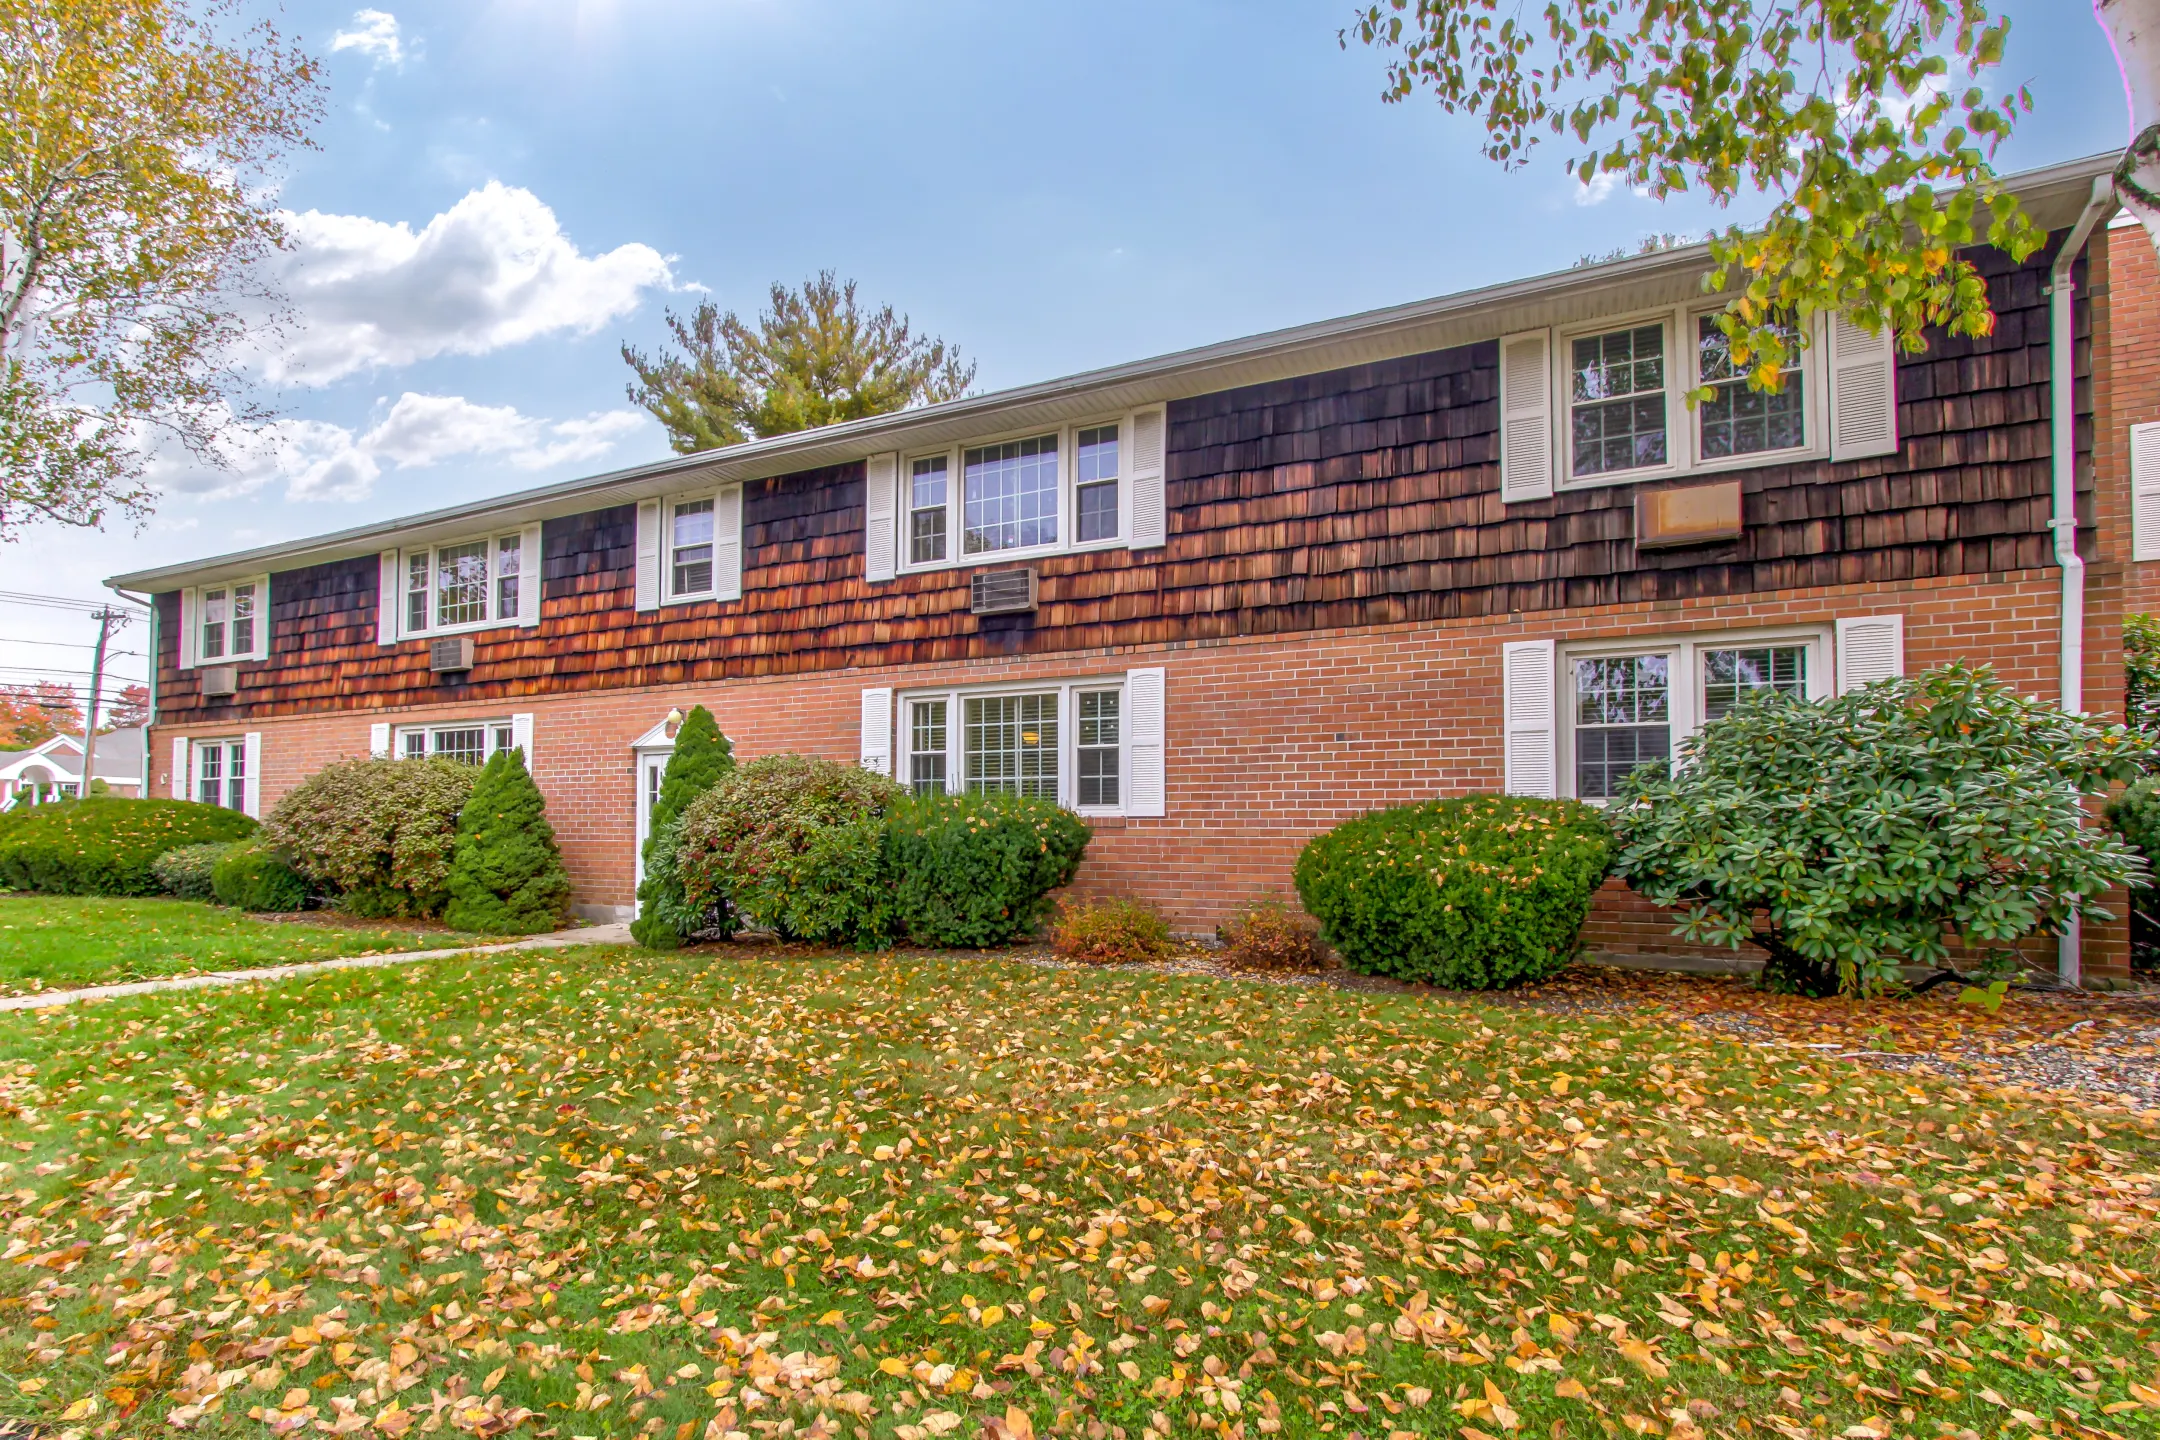 Building - Suffield West Apartments - Suffield, CT